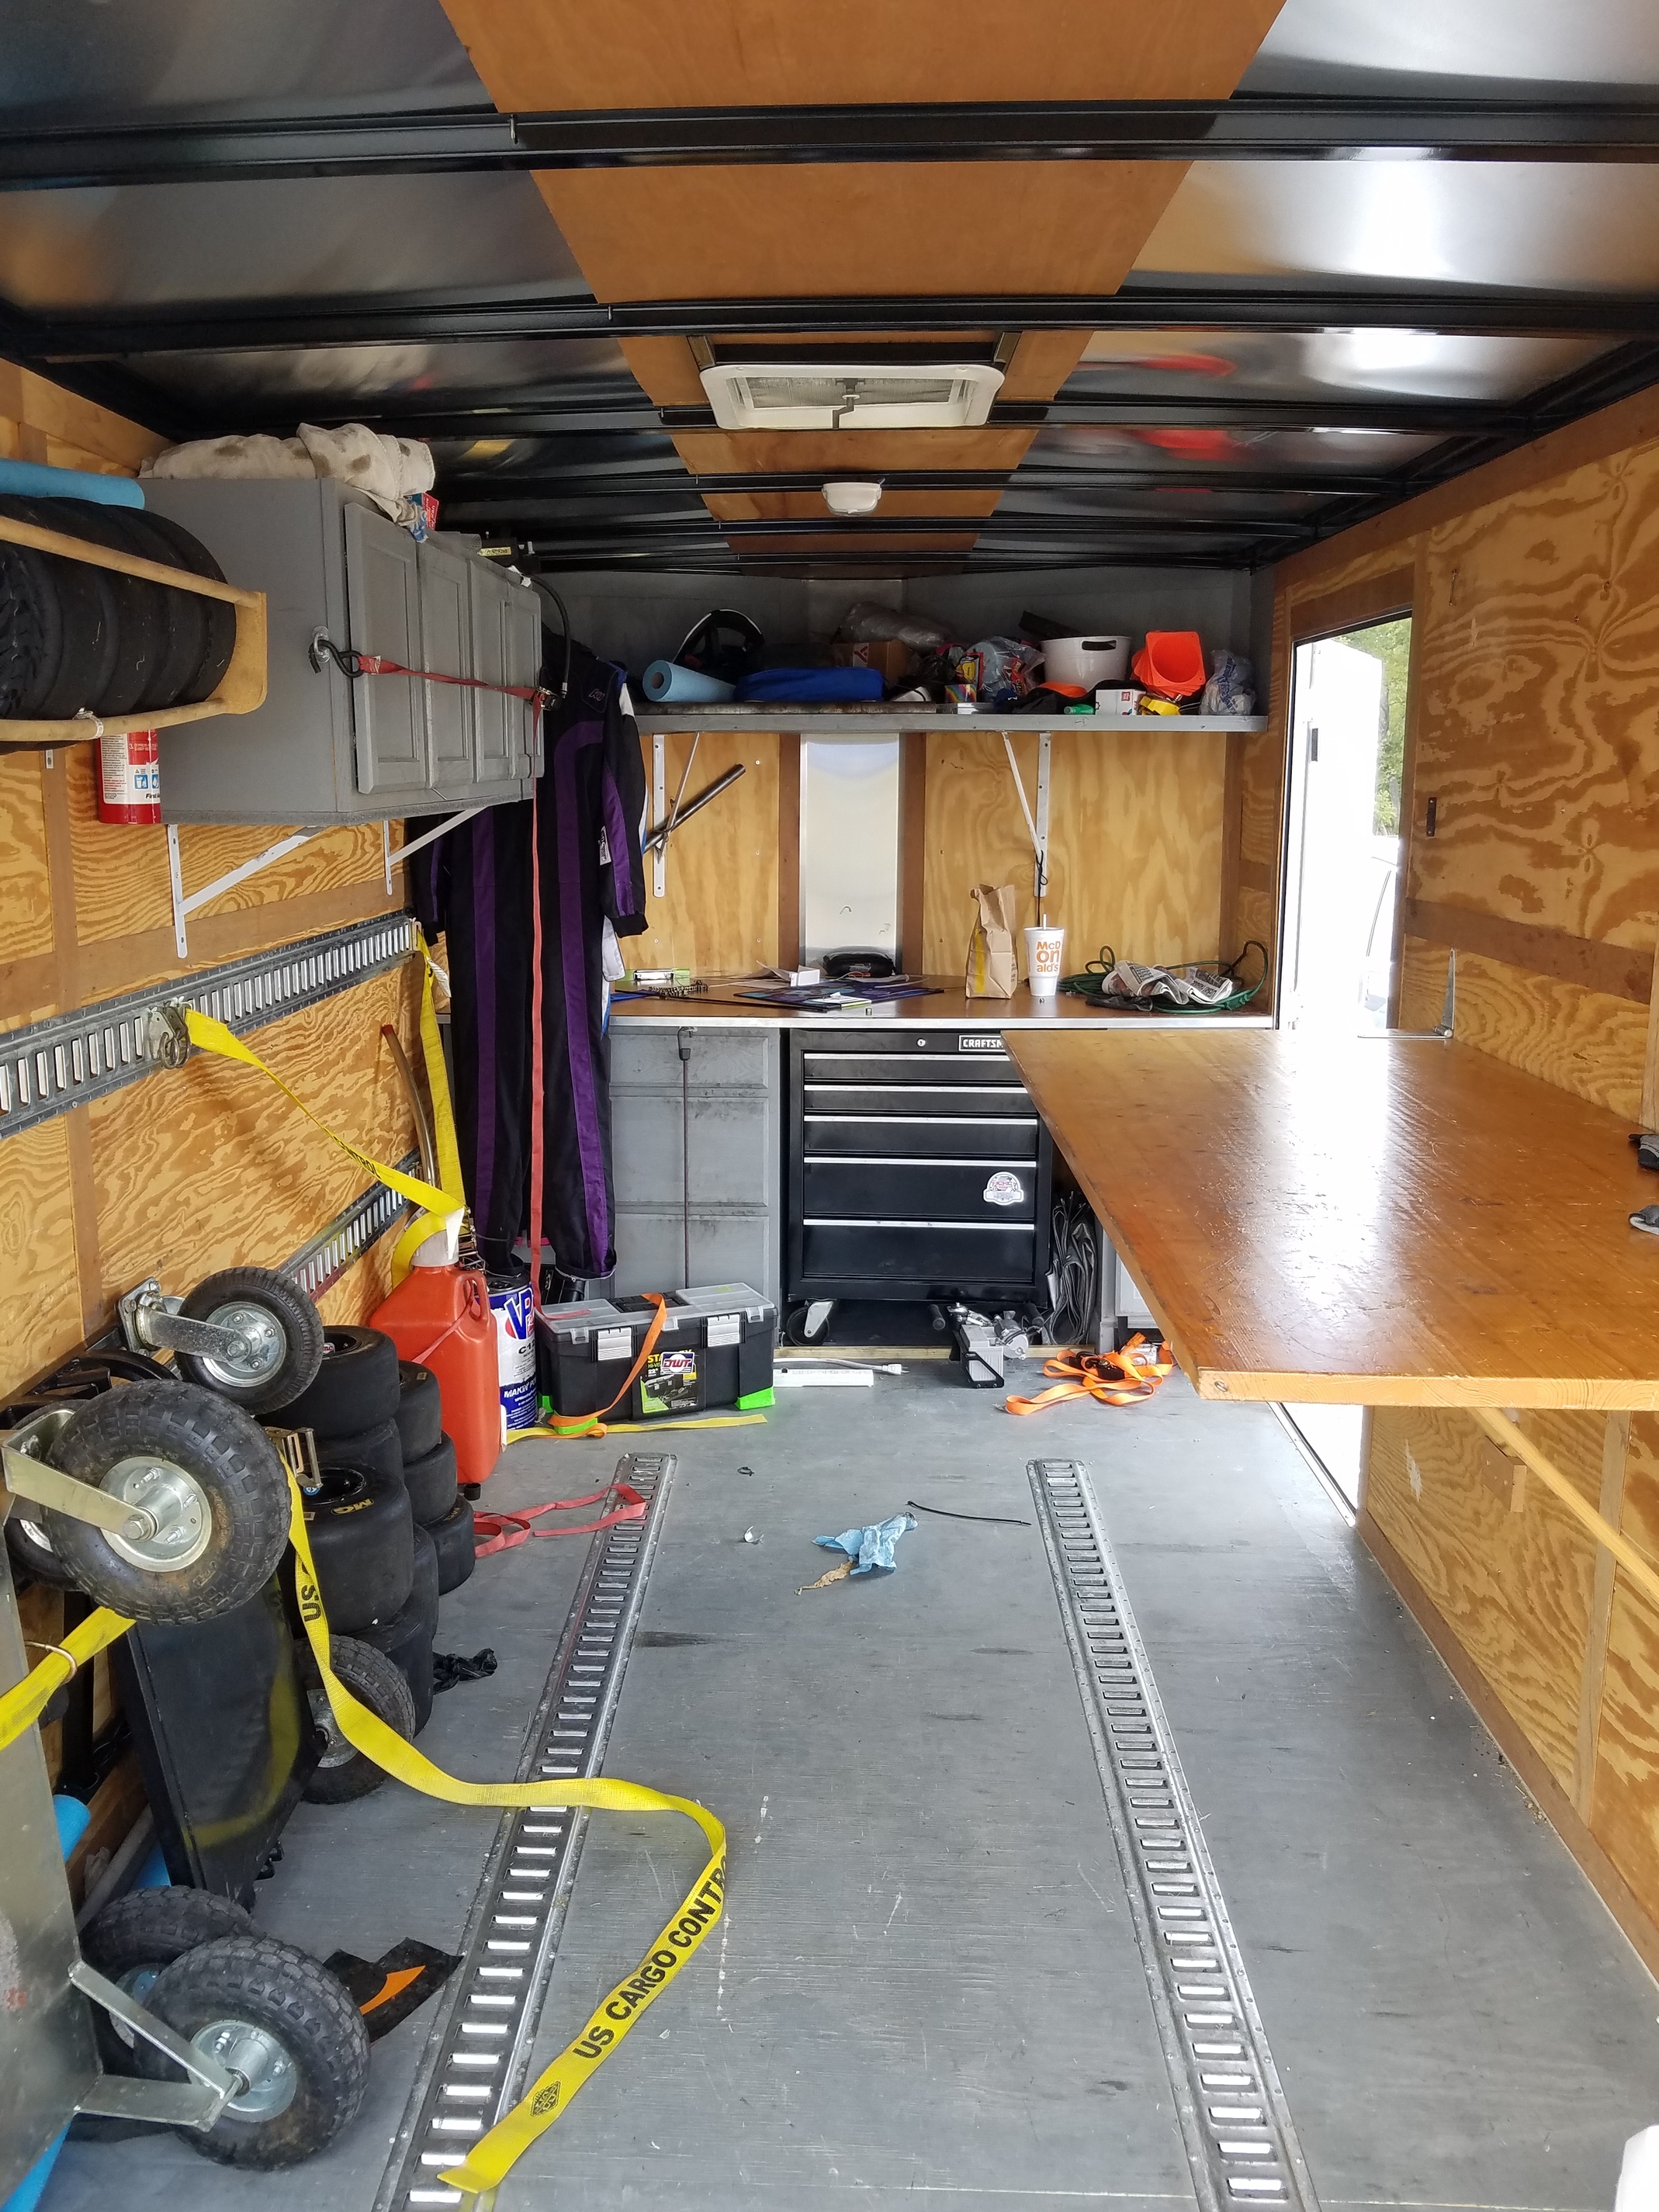 How Is Your Trailer Setup For Karting